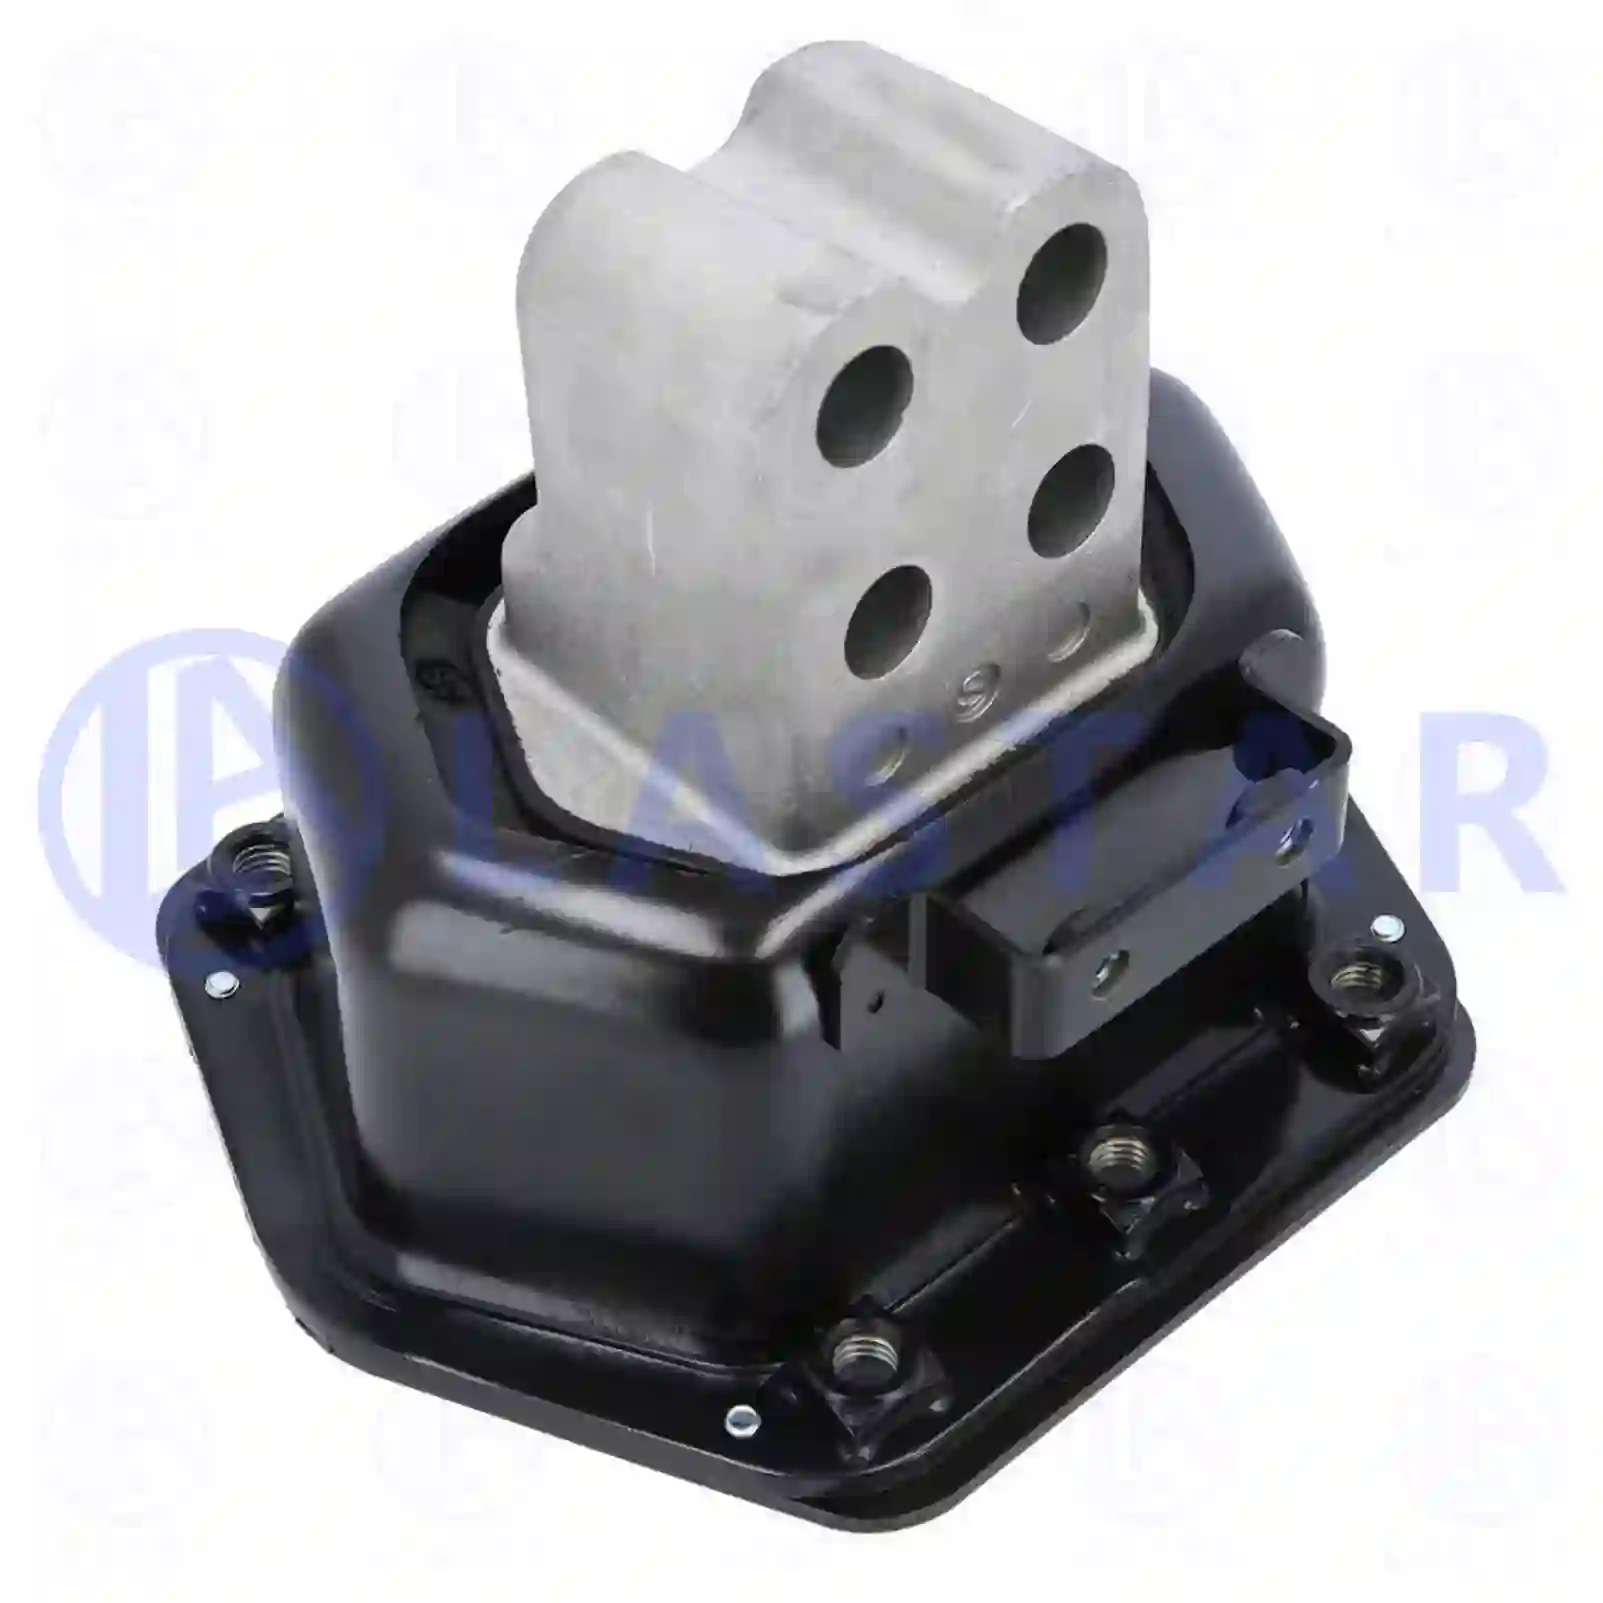 Engine mounting, 77702970, 1806725 ||  77702970 Lastar Spare Part | Truck Spare Parts, Auotomotive Spare Parts Engine mounting, 77702970, 1806725 ||  77702970 Lastar Spare Part | Truck Spare Parts, Auotomotive Spare Parts